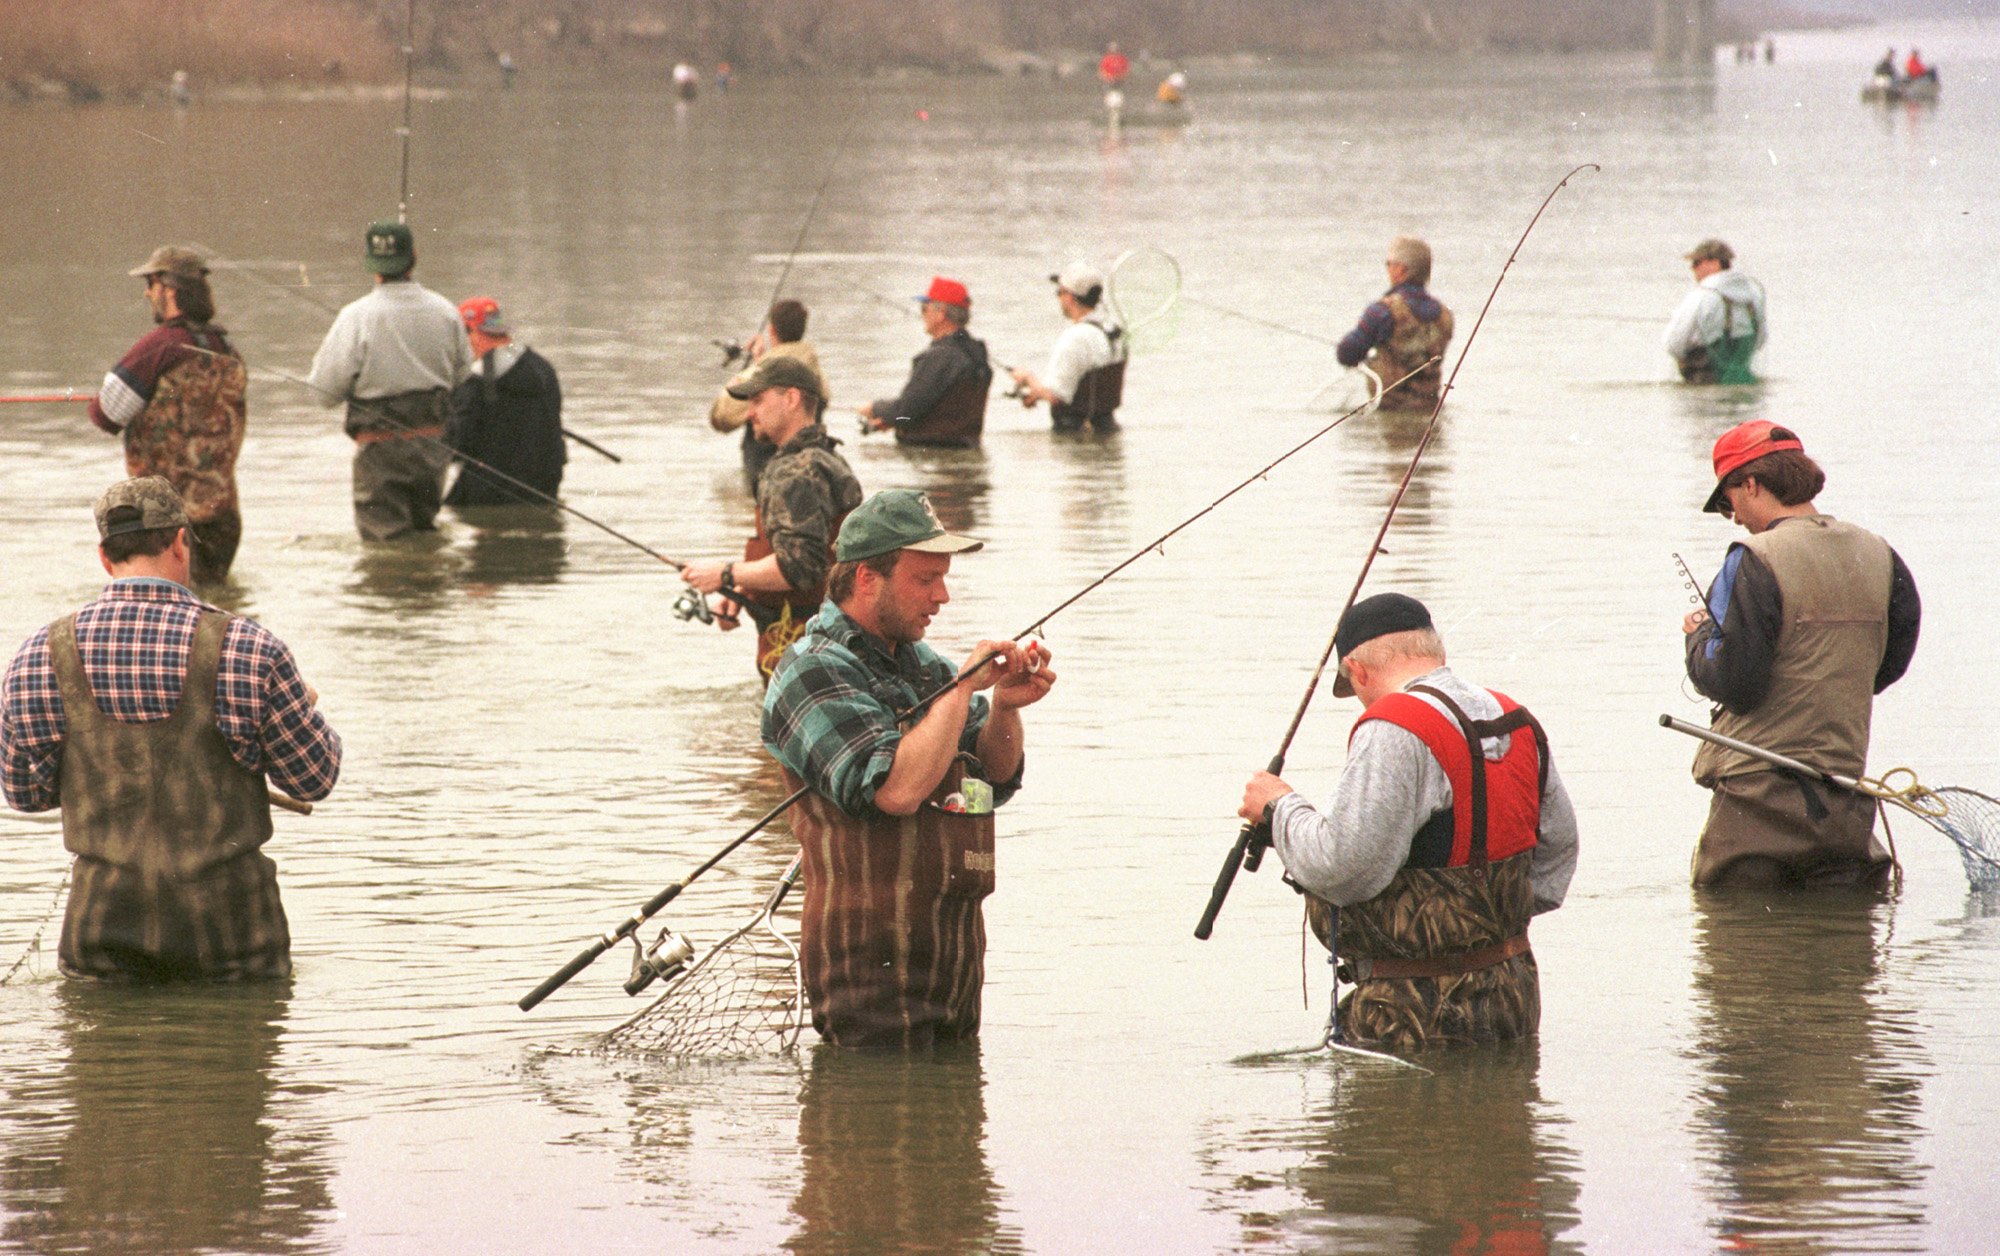 Record Ohio walleye run, huge crowds lead to fishing license restrictions, Sandusky and Maumee river closings during pandemic